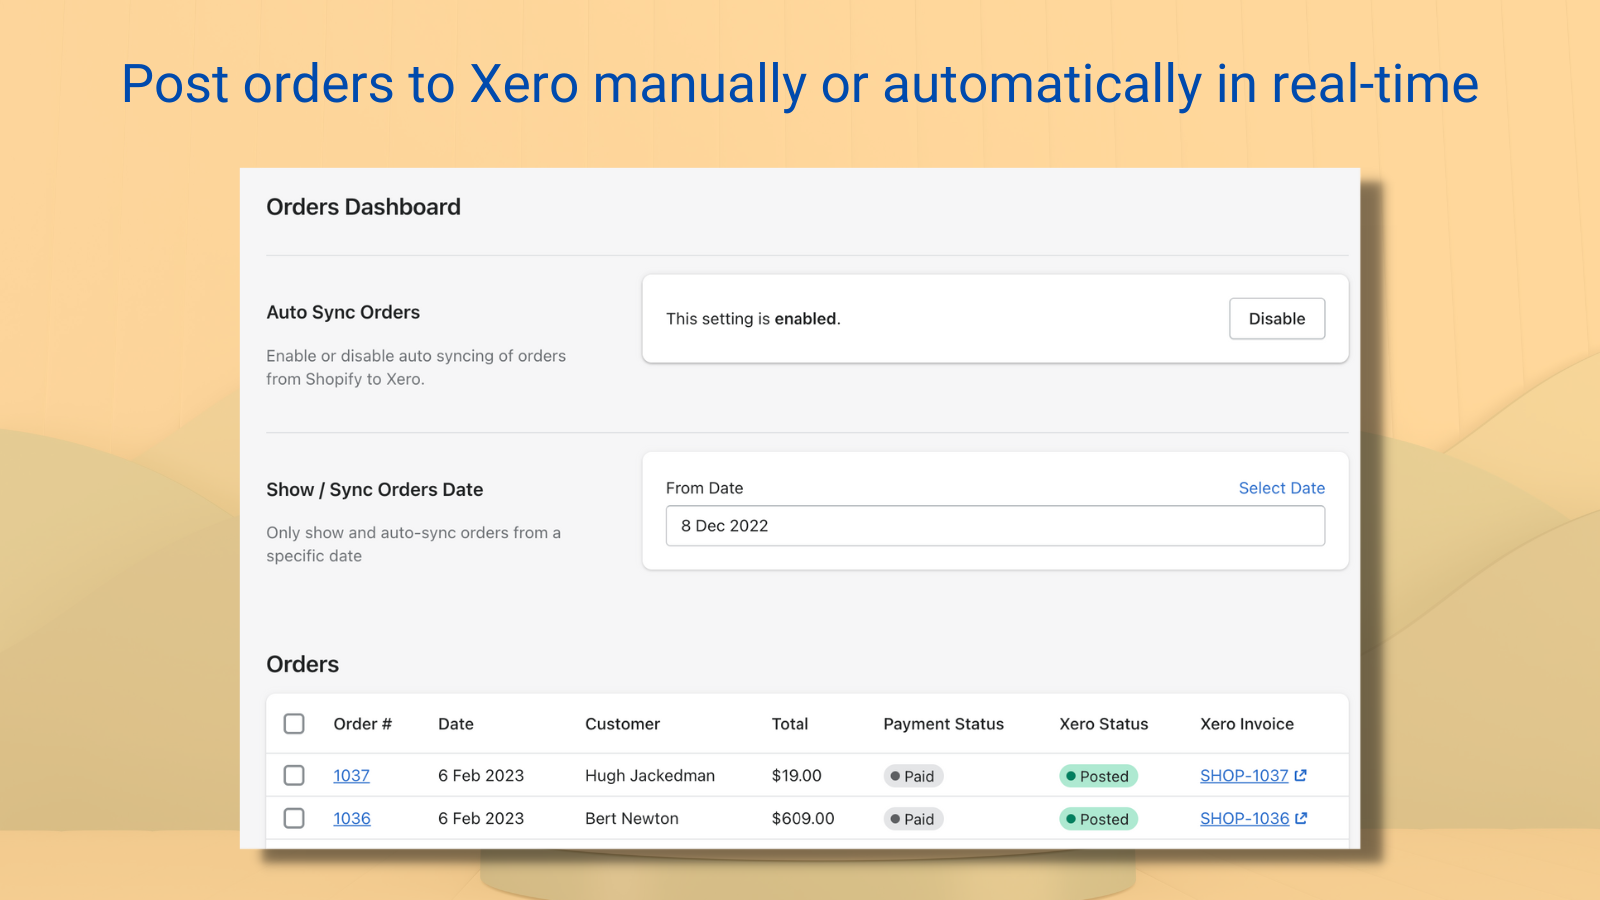 Post orders to Xero in real-time